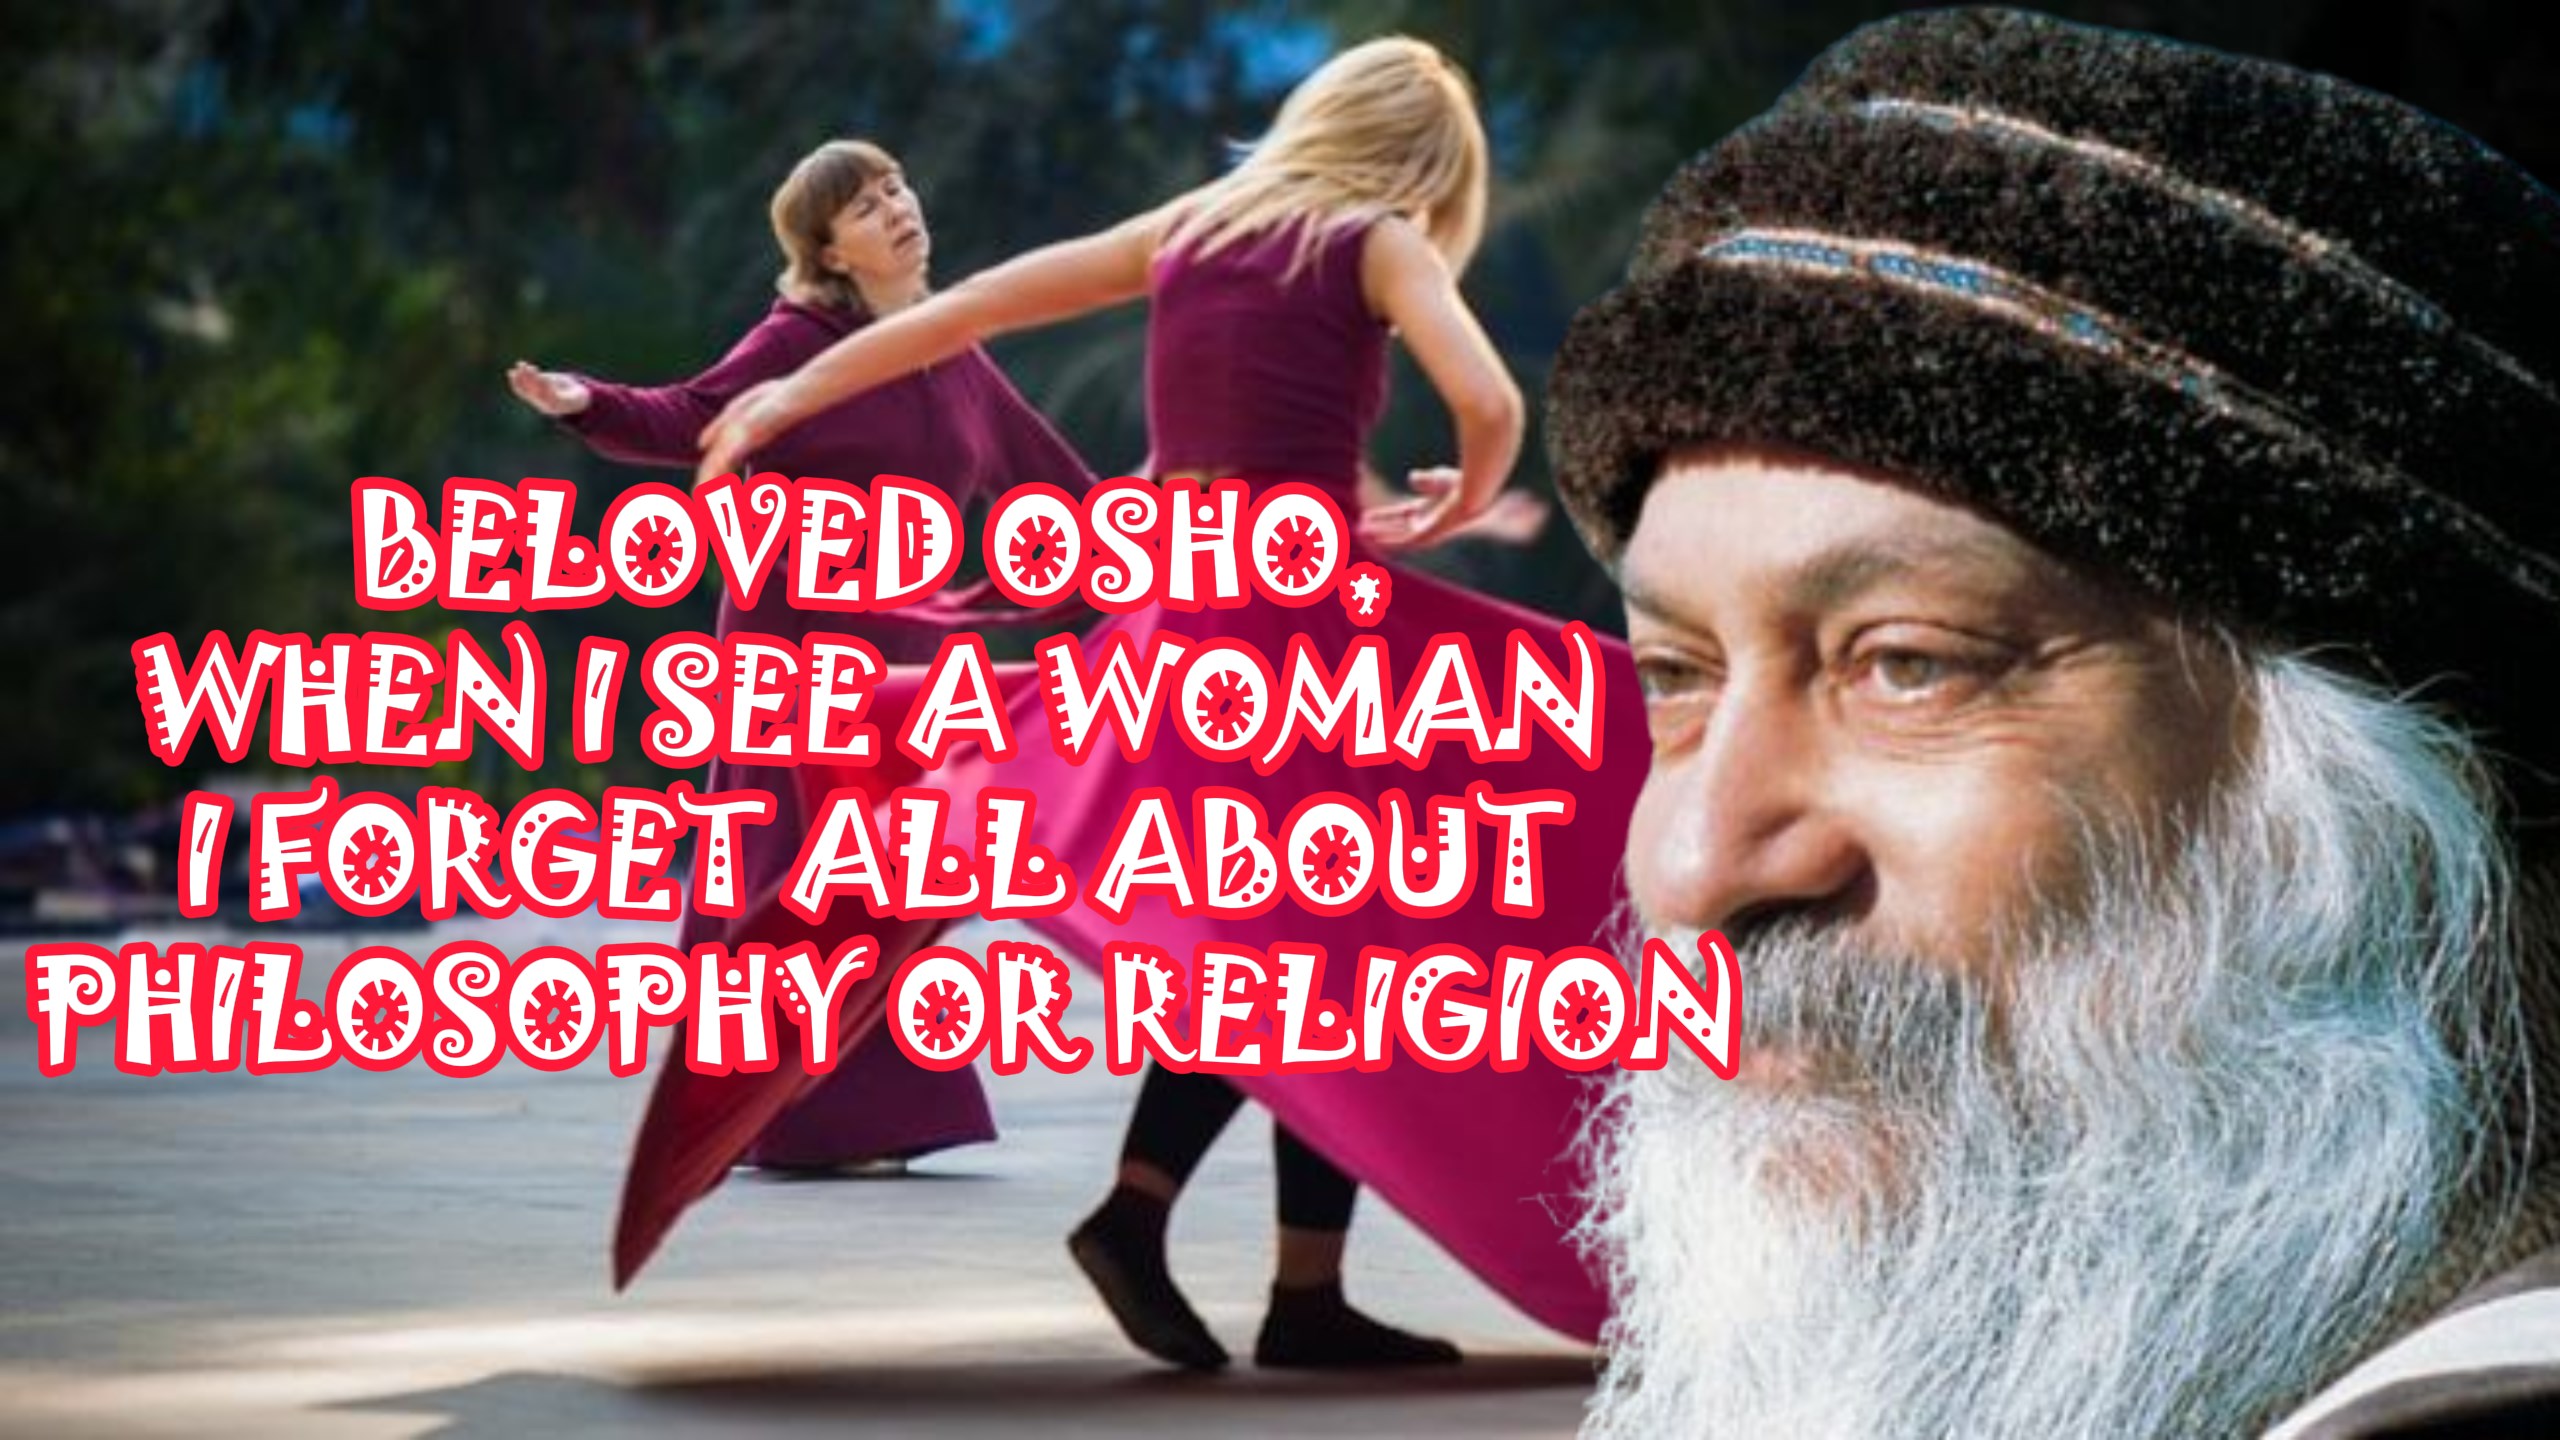 BELOVED OSHO, I HAVE NOTICED THAT WHEN I SEE A WOMAN WHO IS PARTICULARLY LOVELY, AND I AM TAKEN INTO THAT SWEET SILENCE, I FORGET ALL ABOUT PHILOSOPHY OR RELIGION, BUT I AM LOST AND FOUND ENTERING A MOMENT. I THINK ANIMALS ARE WISE BECAUSE GOD DOESN’T TROUBLE THEM WITH METAPHYSICS. STILL, I WANT TO THROW MY BOOKS OUT. . . BUT STILL I LIKE THEM.